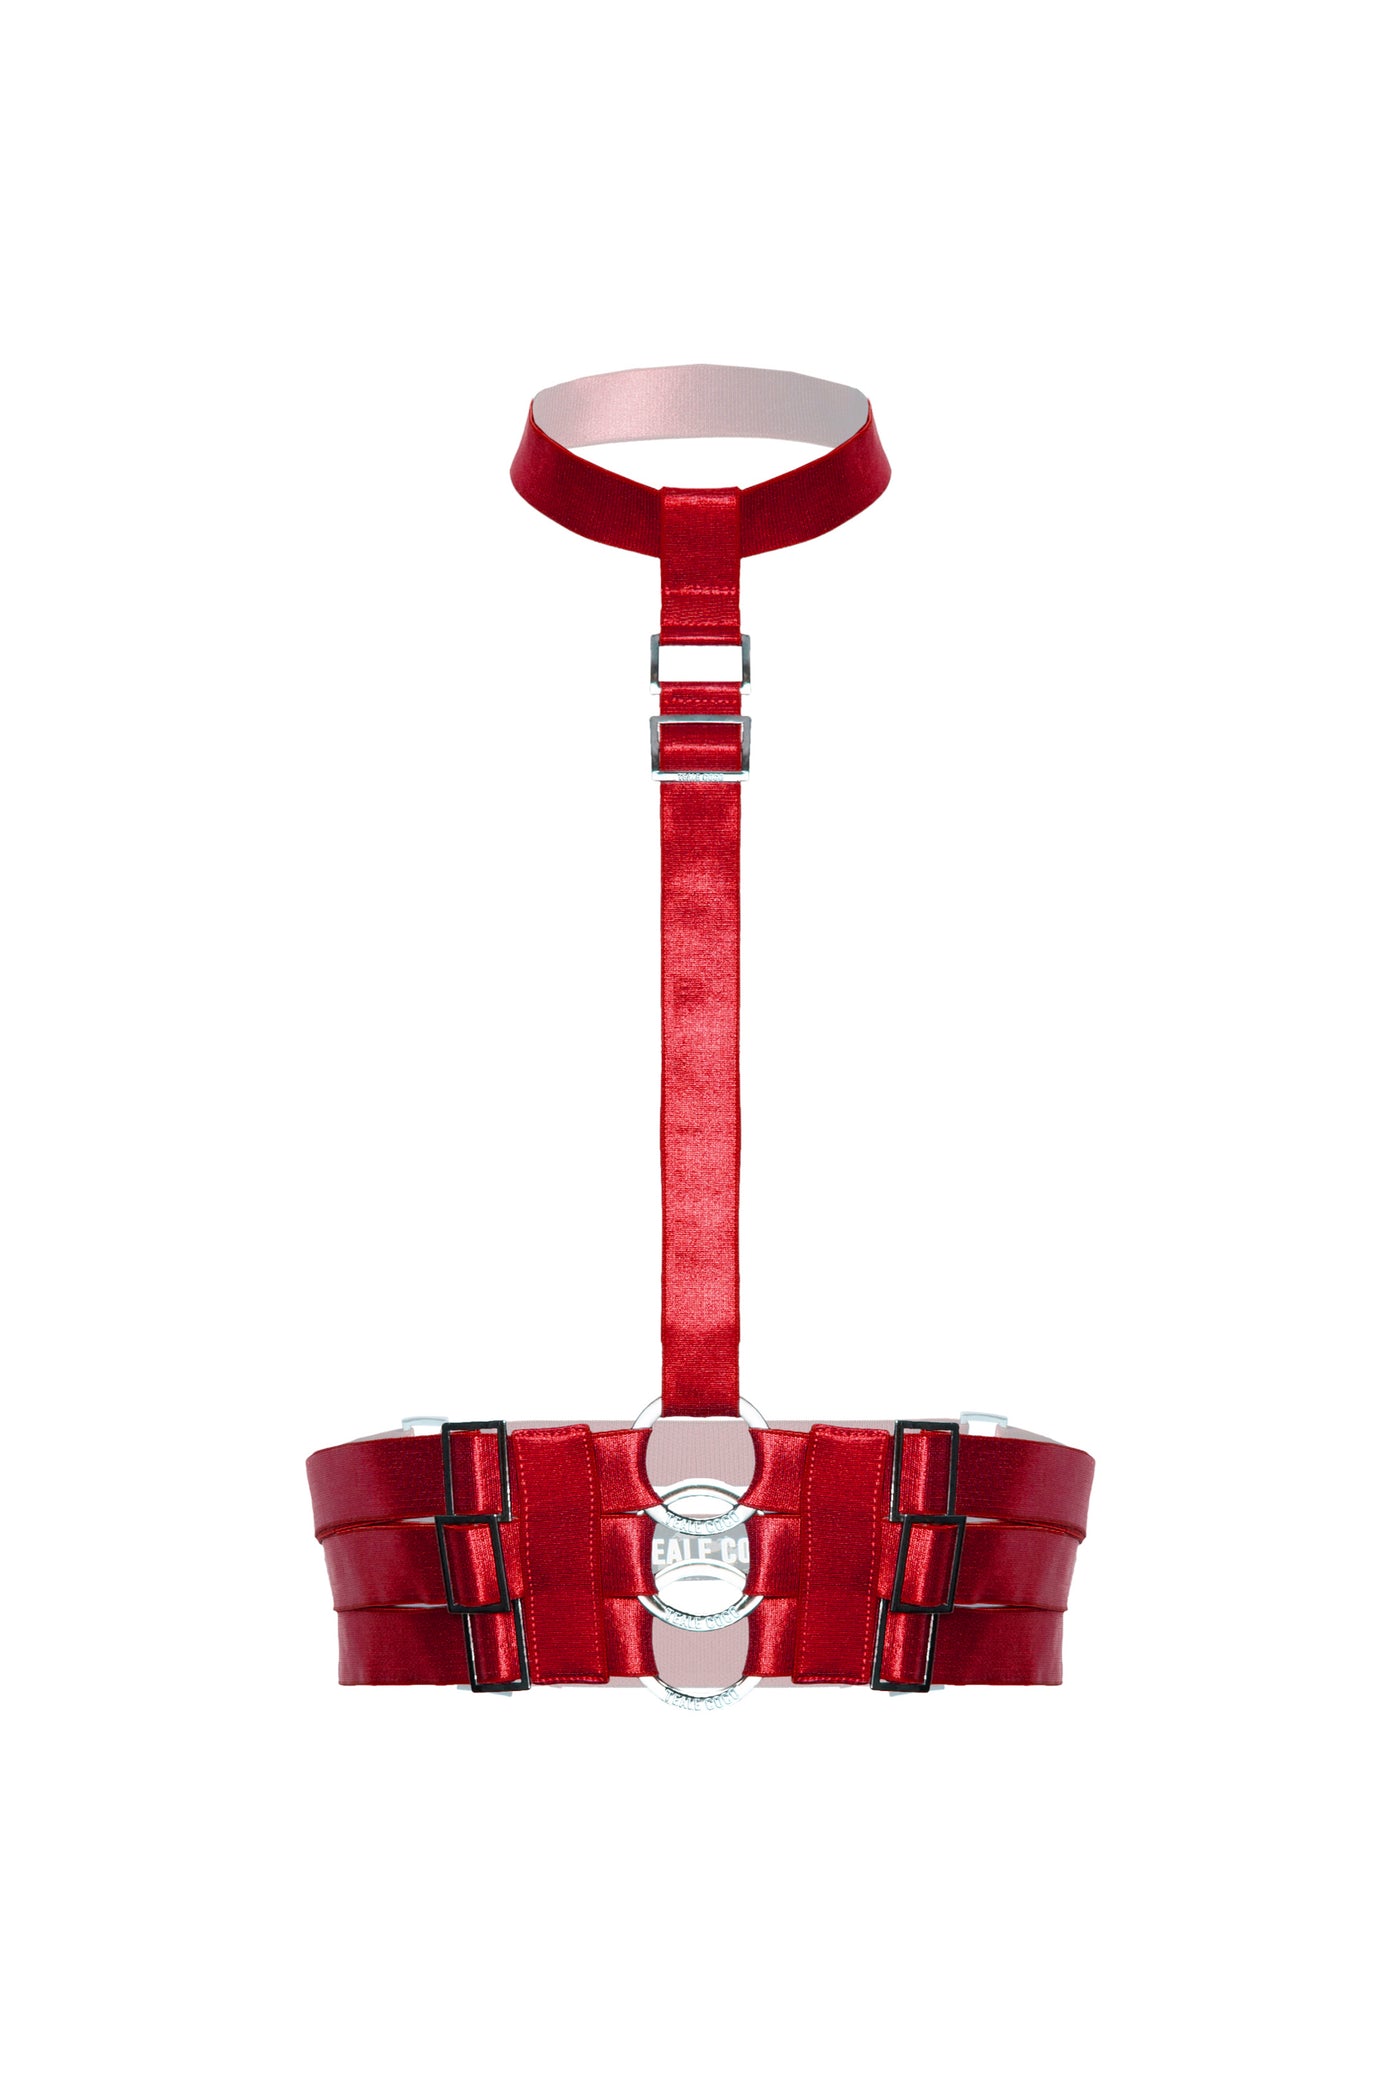 Siren Caged Bust Harness (Bloodbath Red)